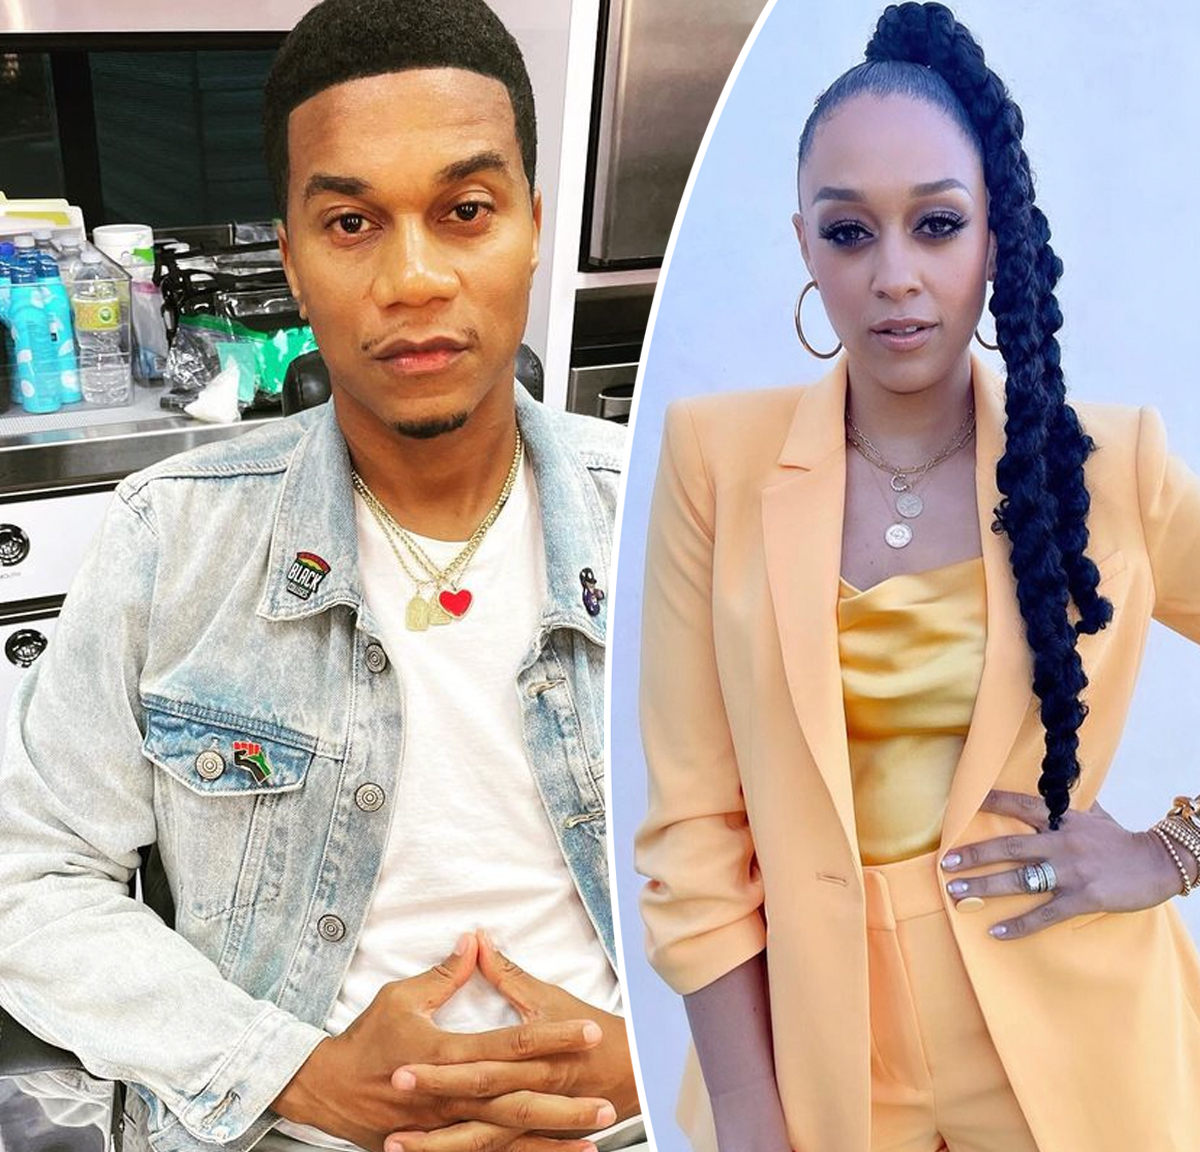 #Did Tia Mowry’s Man Cheat?! Cory Hardrict Responds To Allegations!